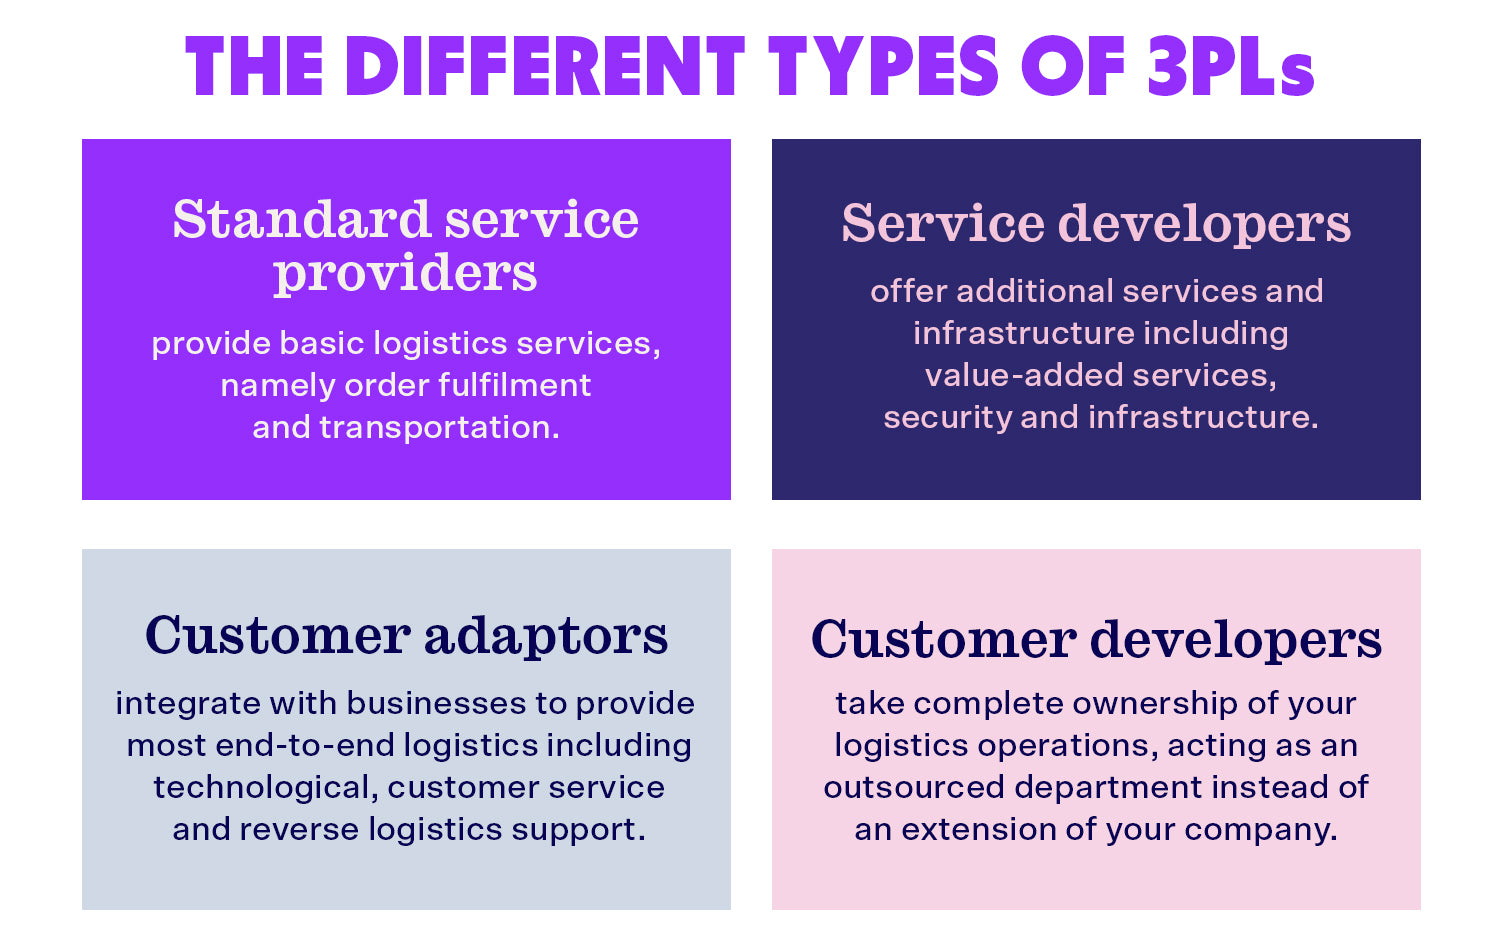 There are four main types of 3PLs: standard service providers, service developers, customer adaptors and customer devlopers.